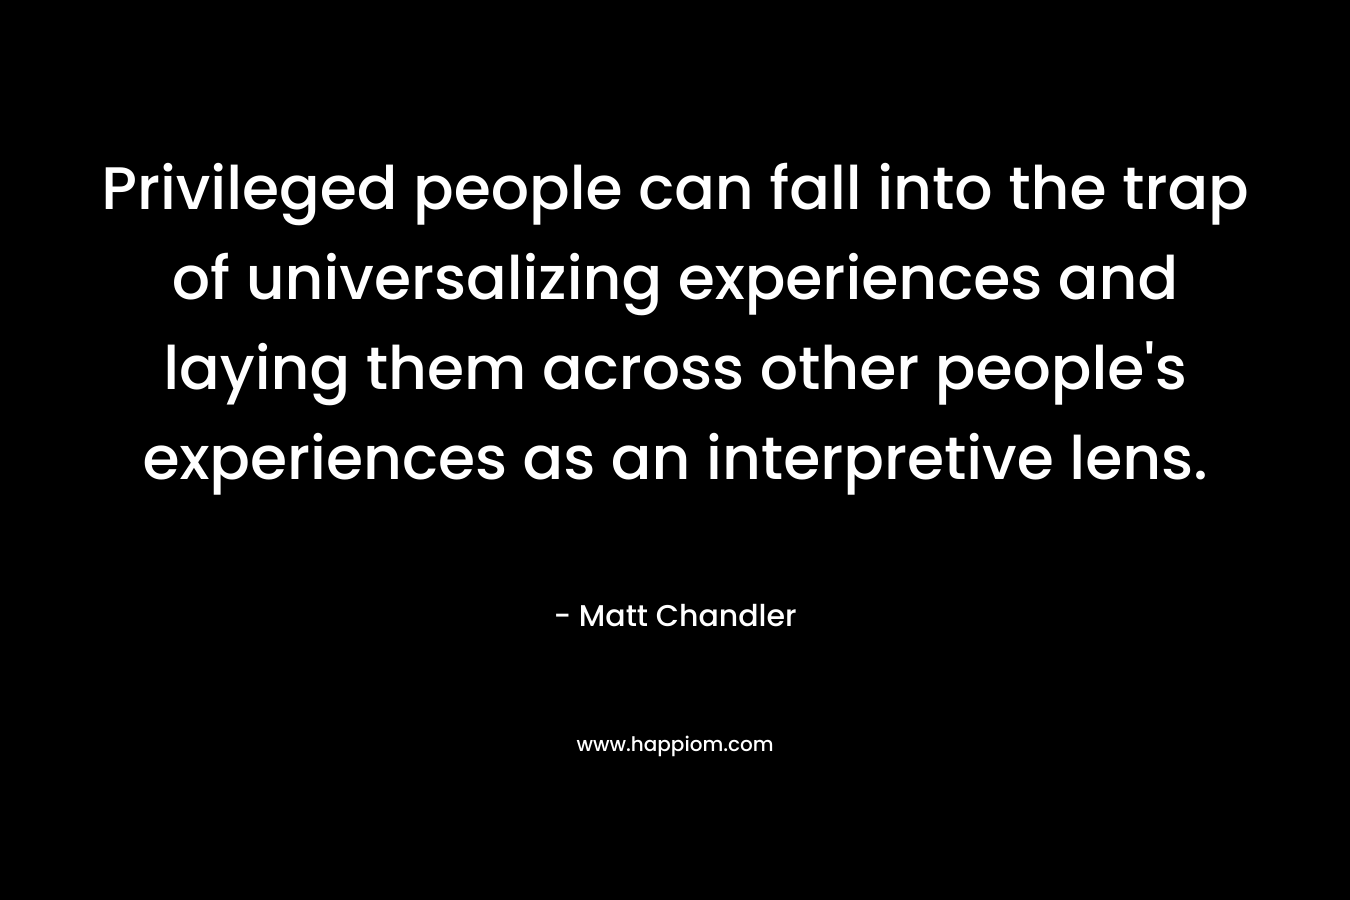 Privileged people can fall into the trap of universalizing experiences and laying them across other people's experiences as an interpretive lens.